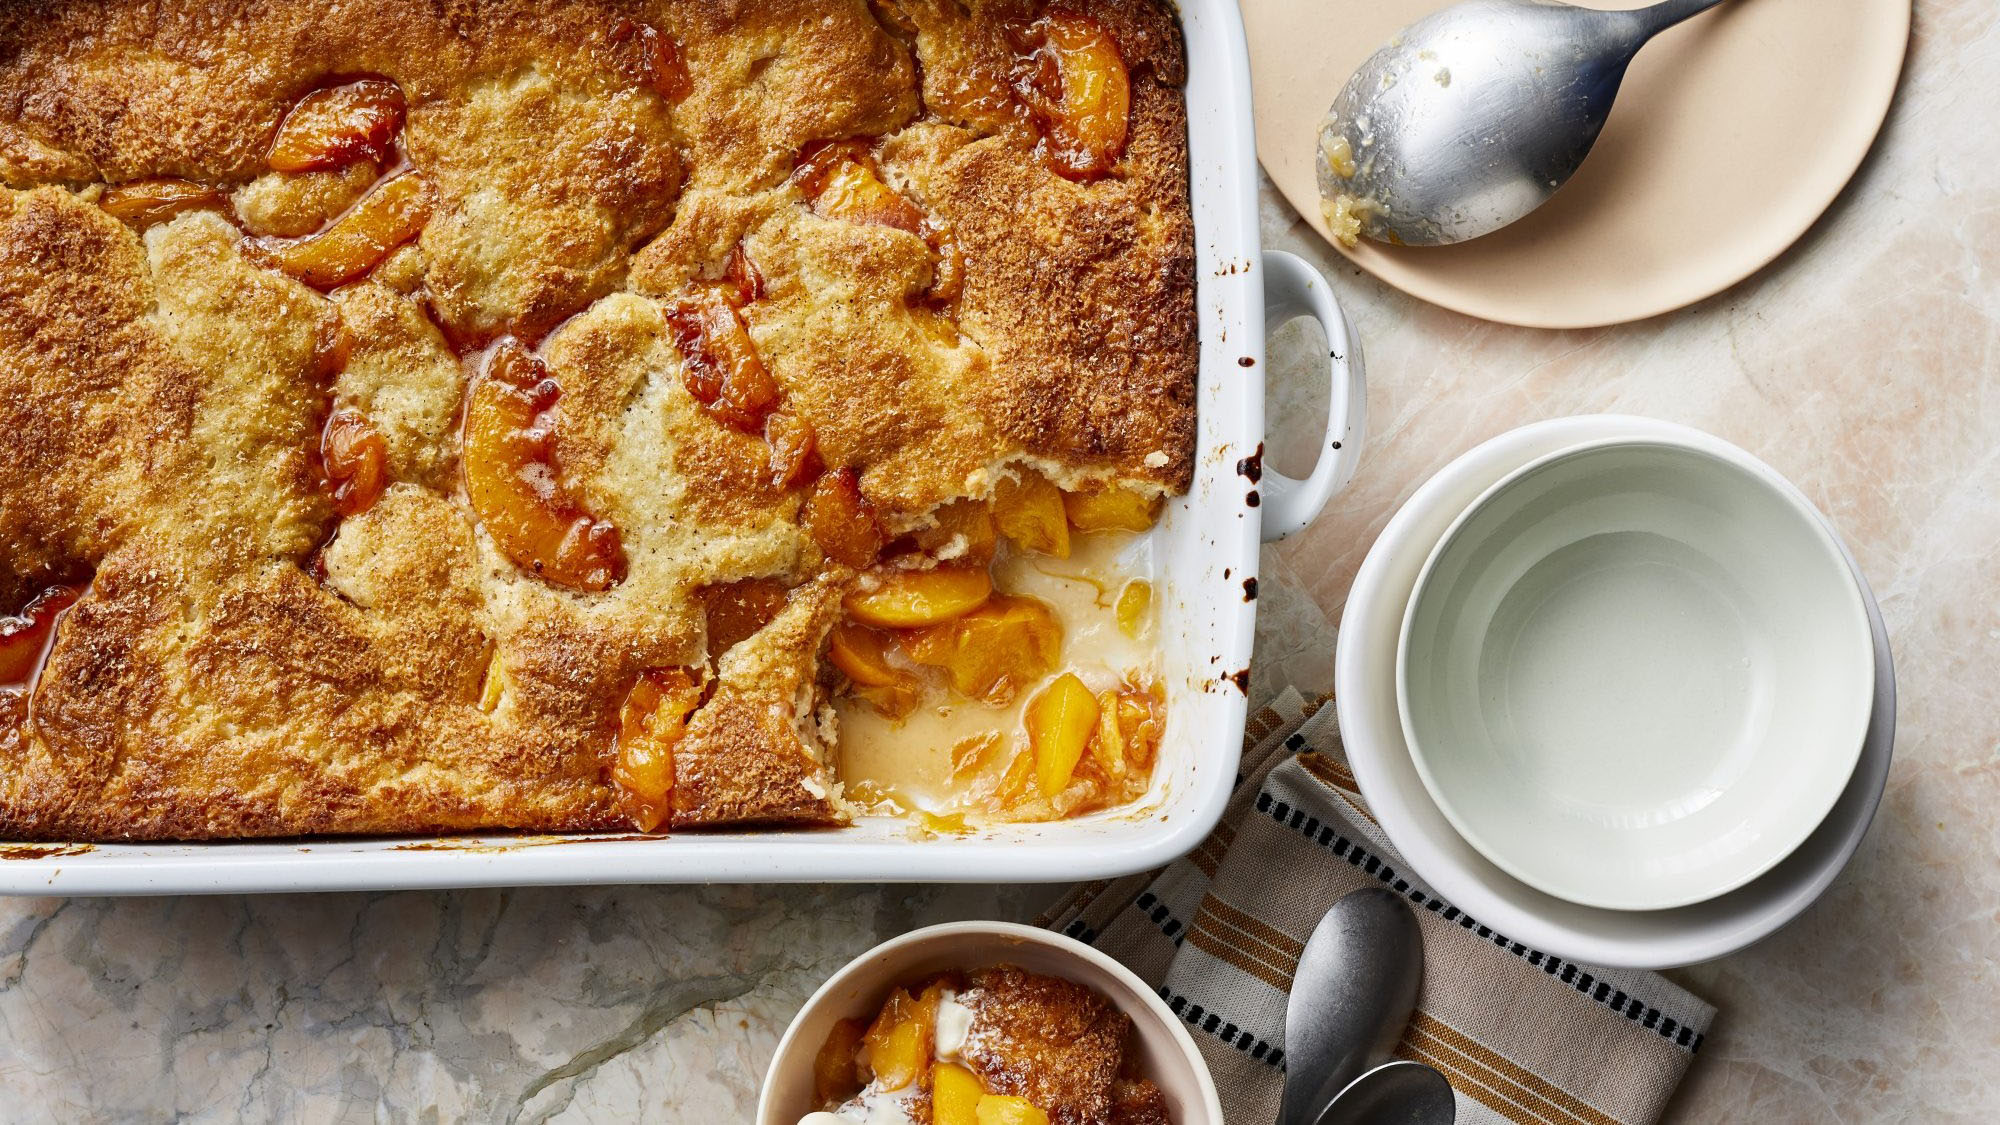 Cobbler is a dessert consisting of a fruit (or less commonly savory) filling poured into a large baking dish and covered with a batter, biscuit, or du...